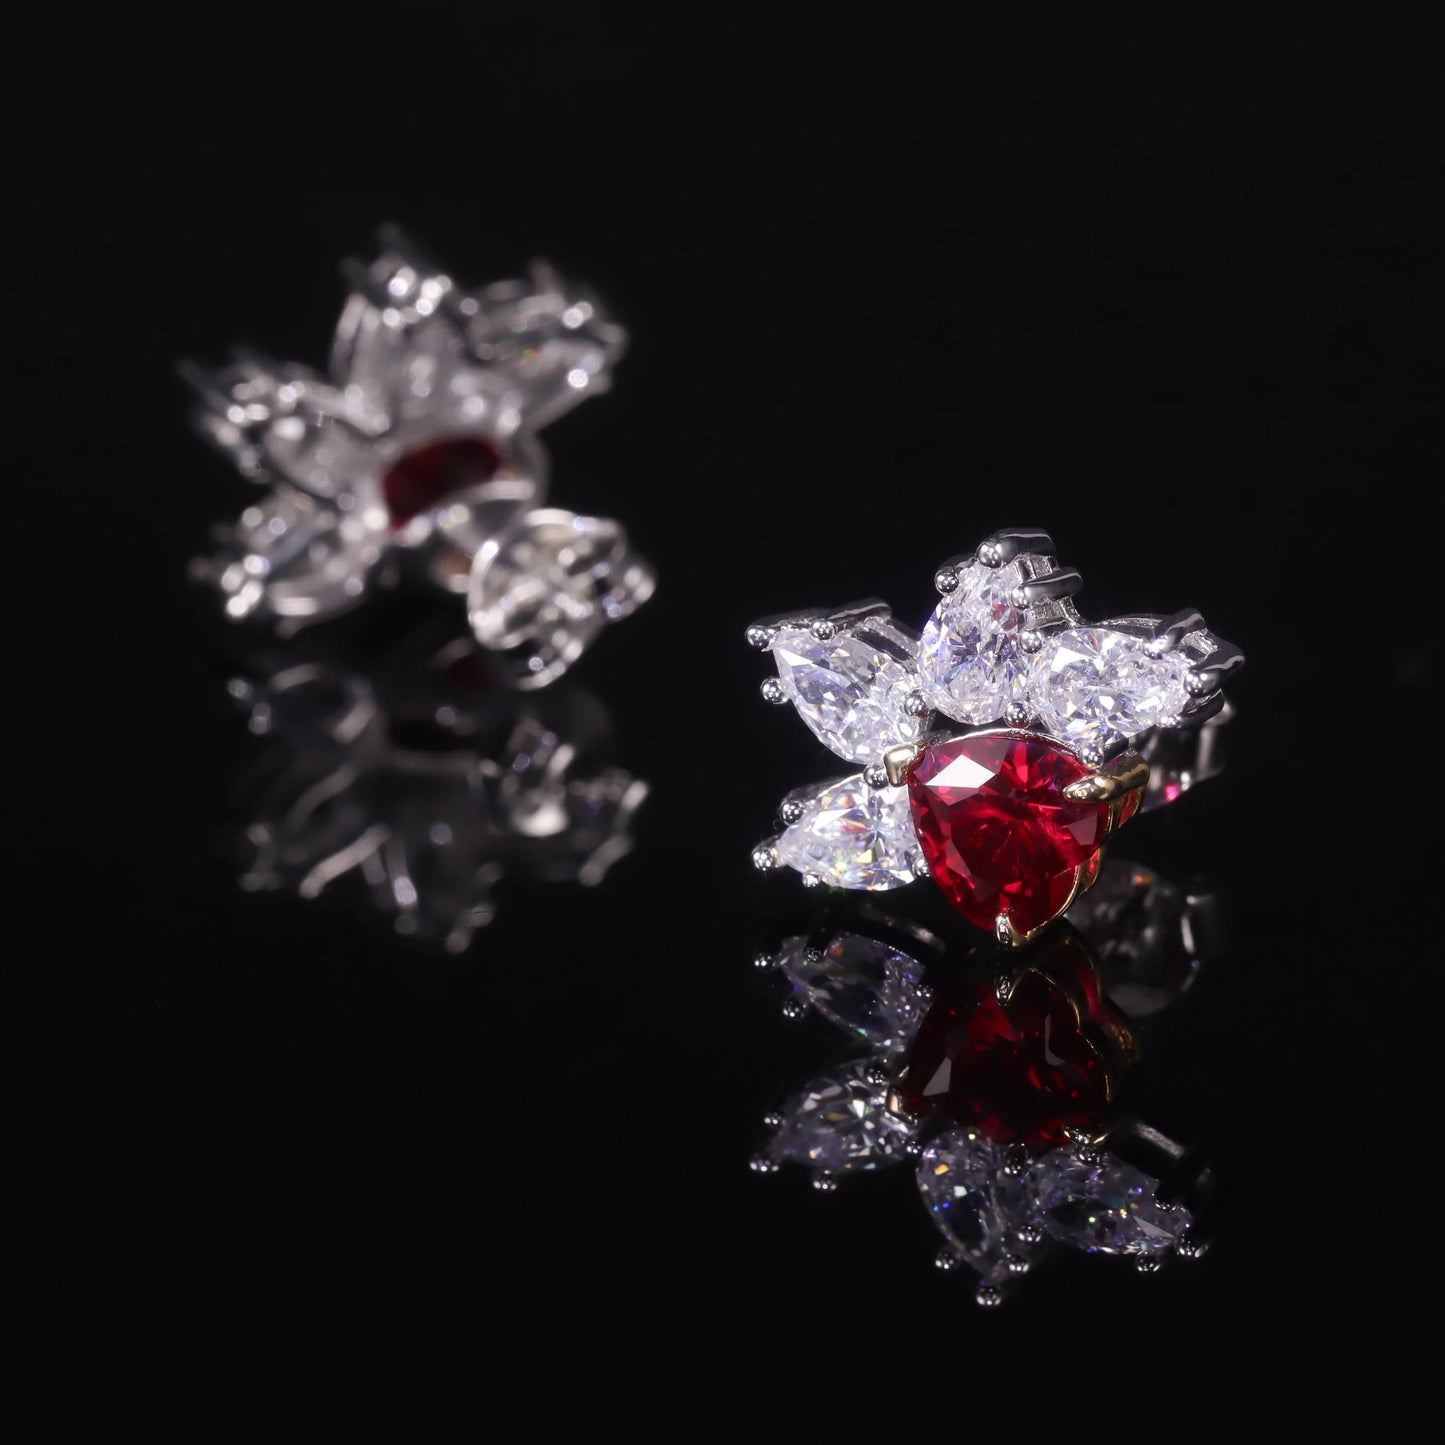 GEM'S BALLET Palm Leaf Fabulous Earring Luxury Lab Created Ruby Earring Exquisite Vintage Design Earrings 925 Sterling Silver